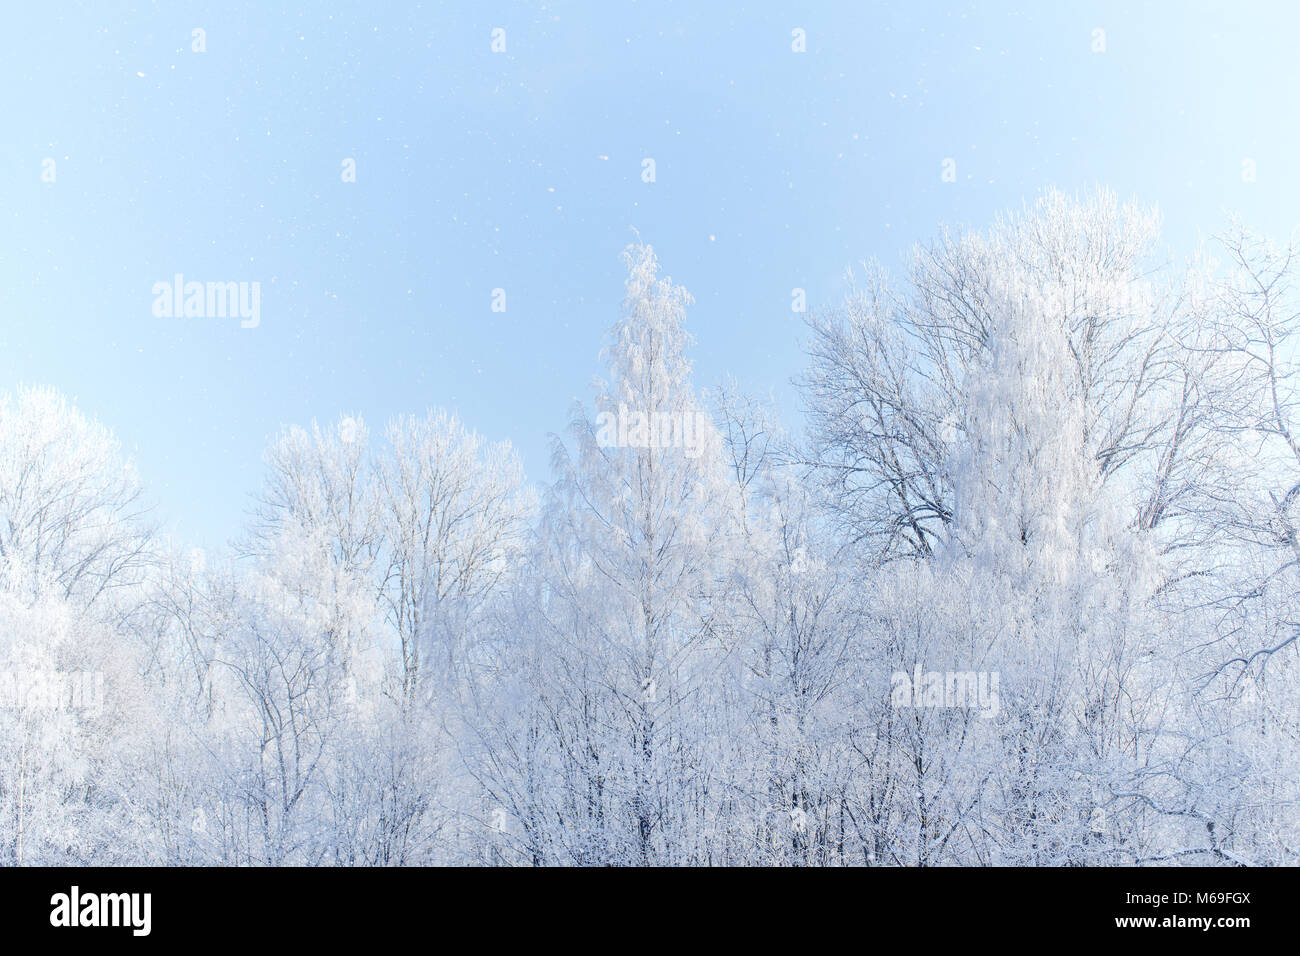 High key winter forest landscape. White trees in the frost Stock Photo